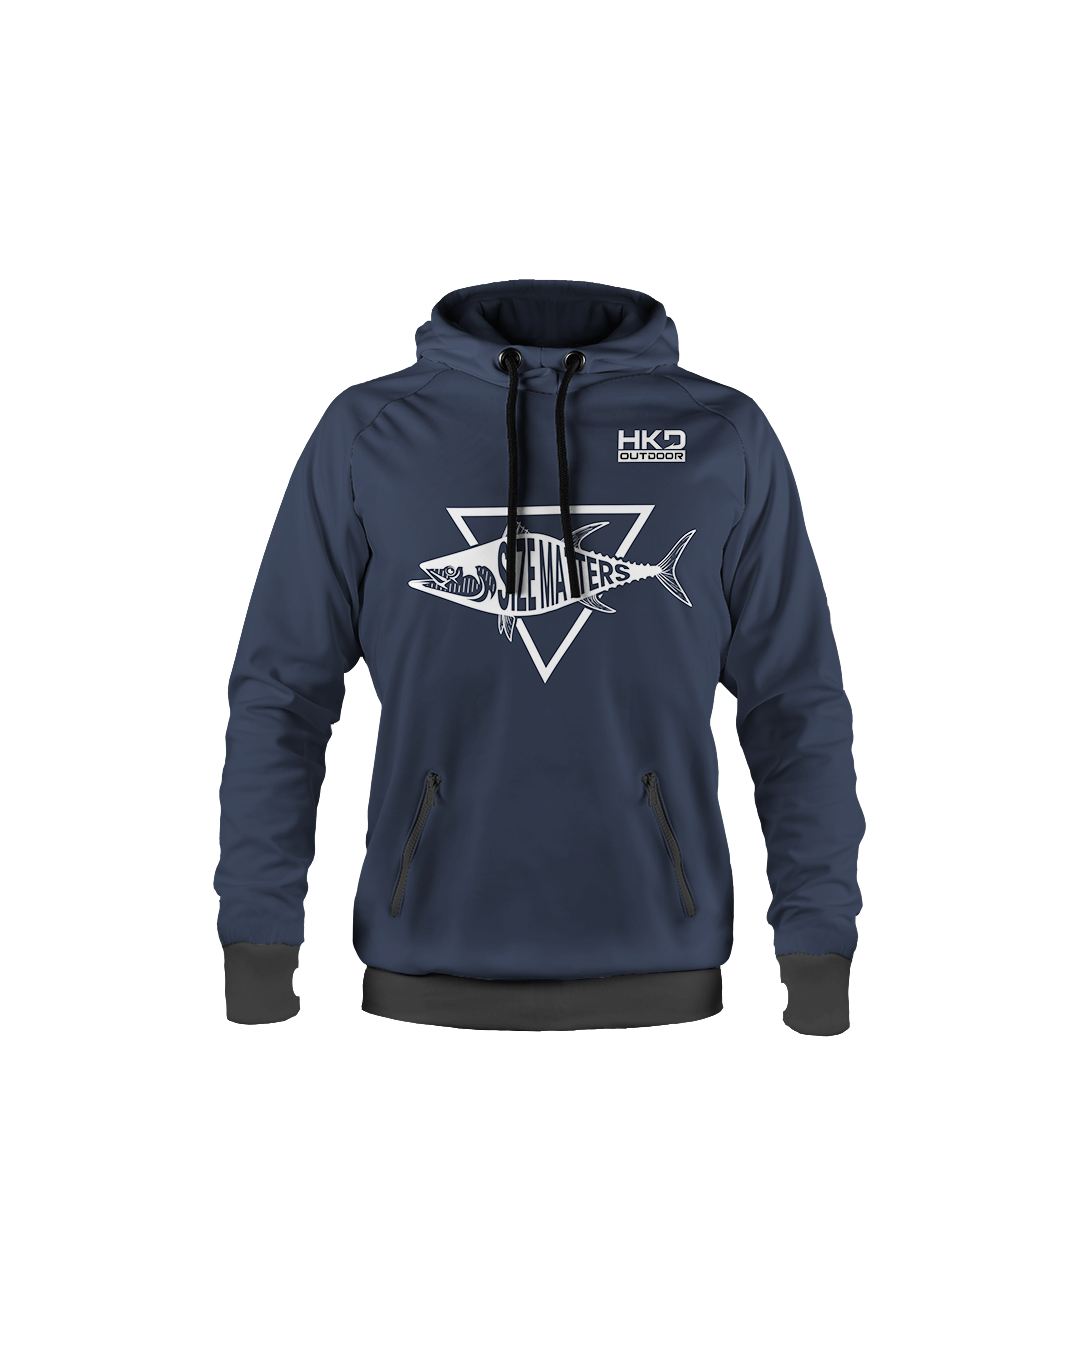 Size Matters hoodie